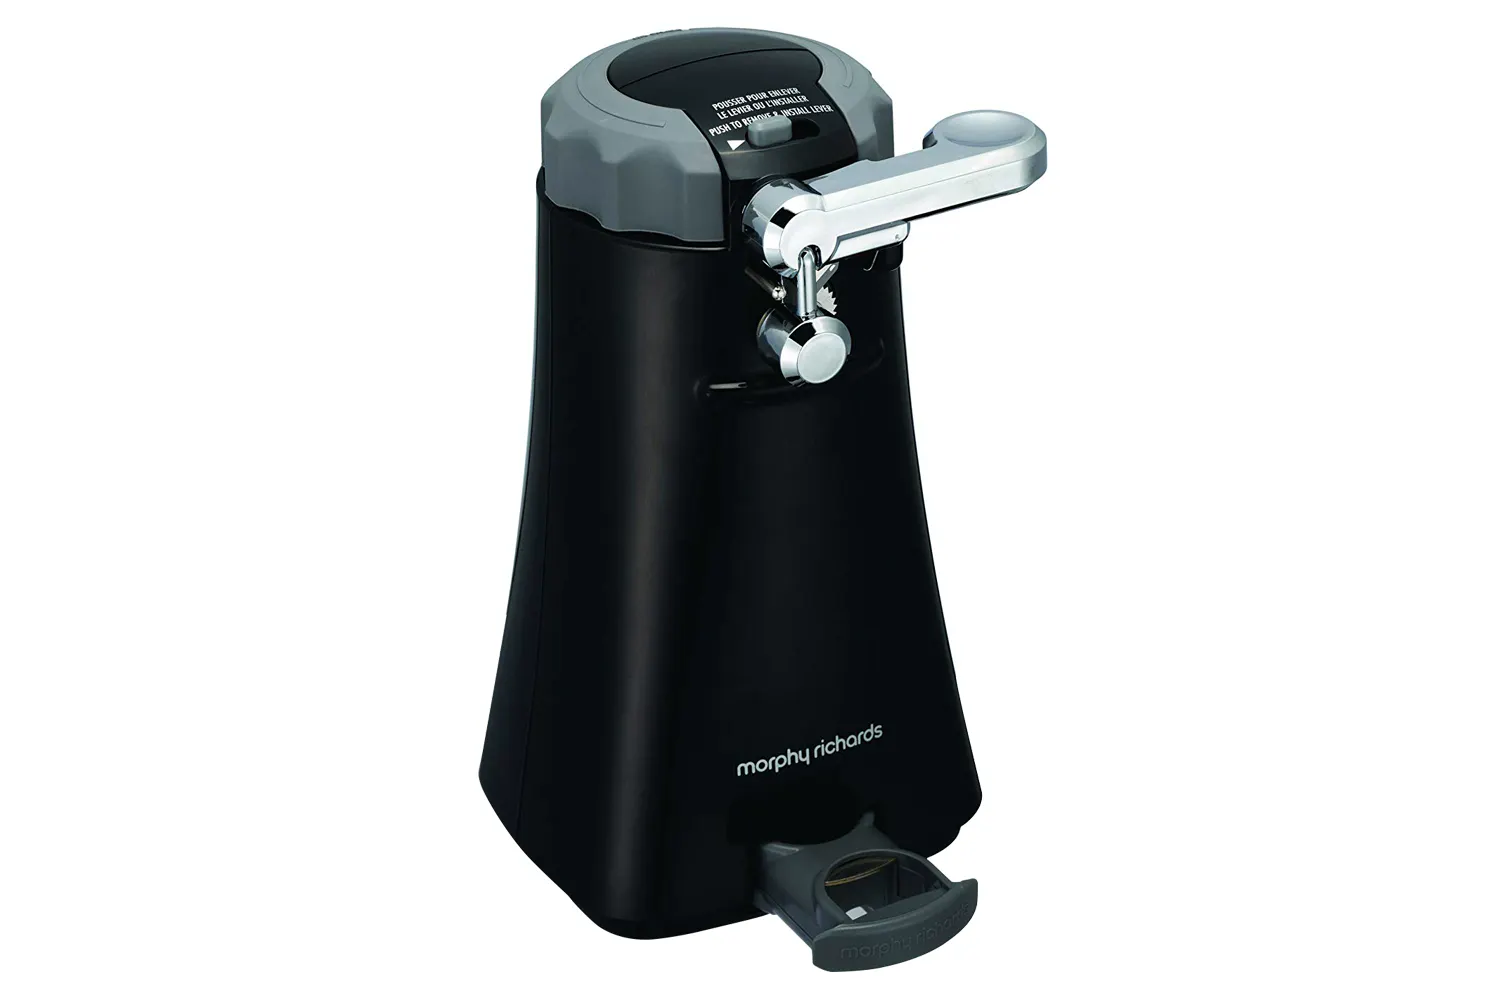 Image of a • Morphy Richards Multifunction Can Opener on a white background. The device is black colour.